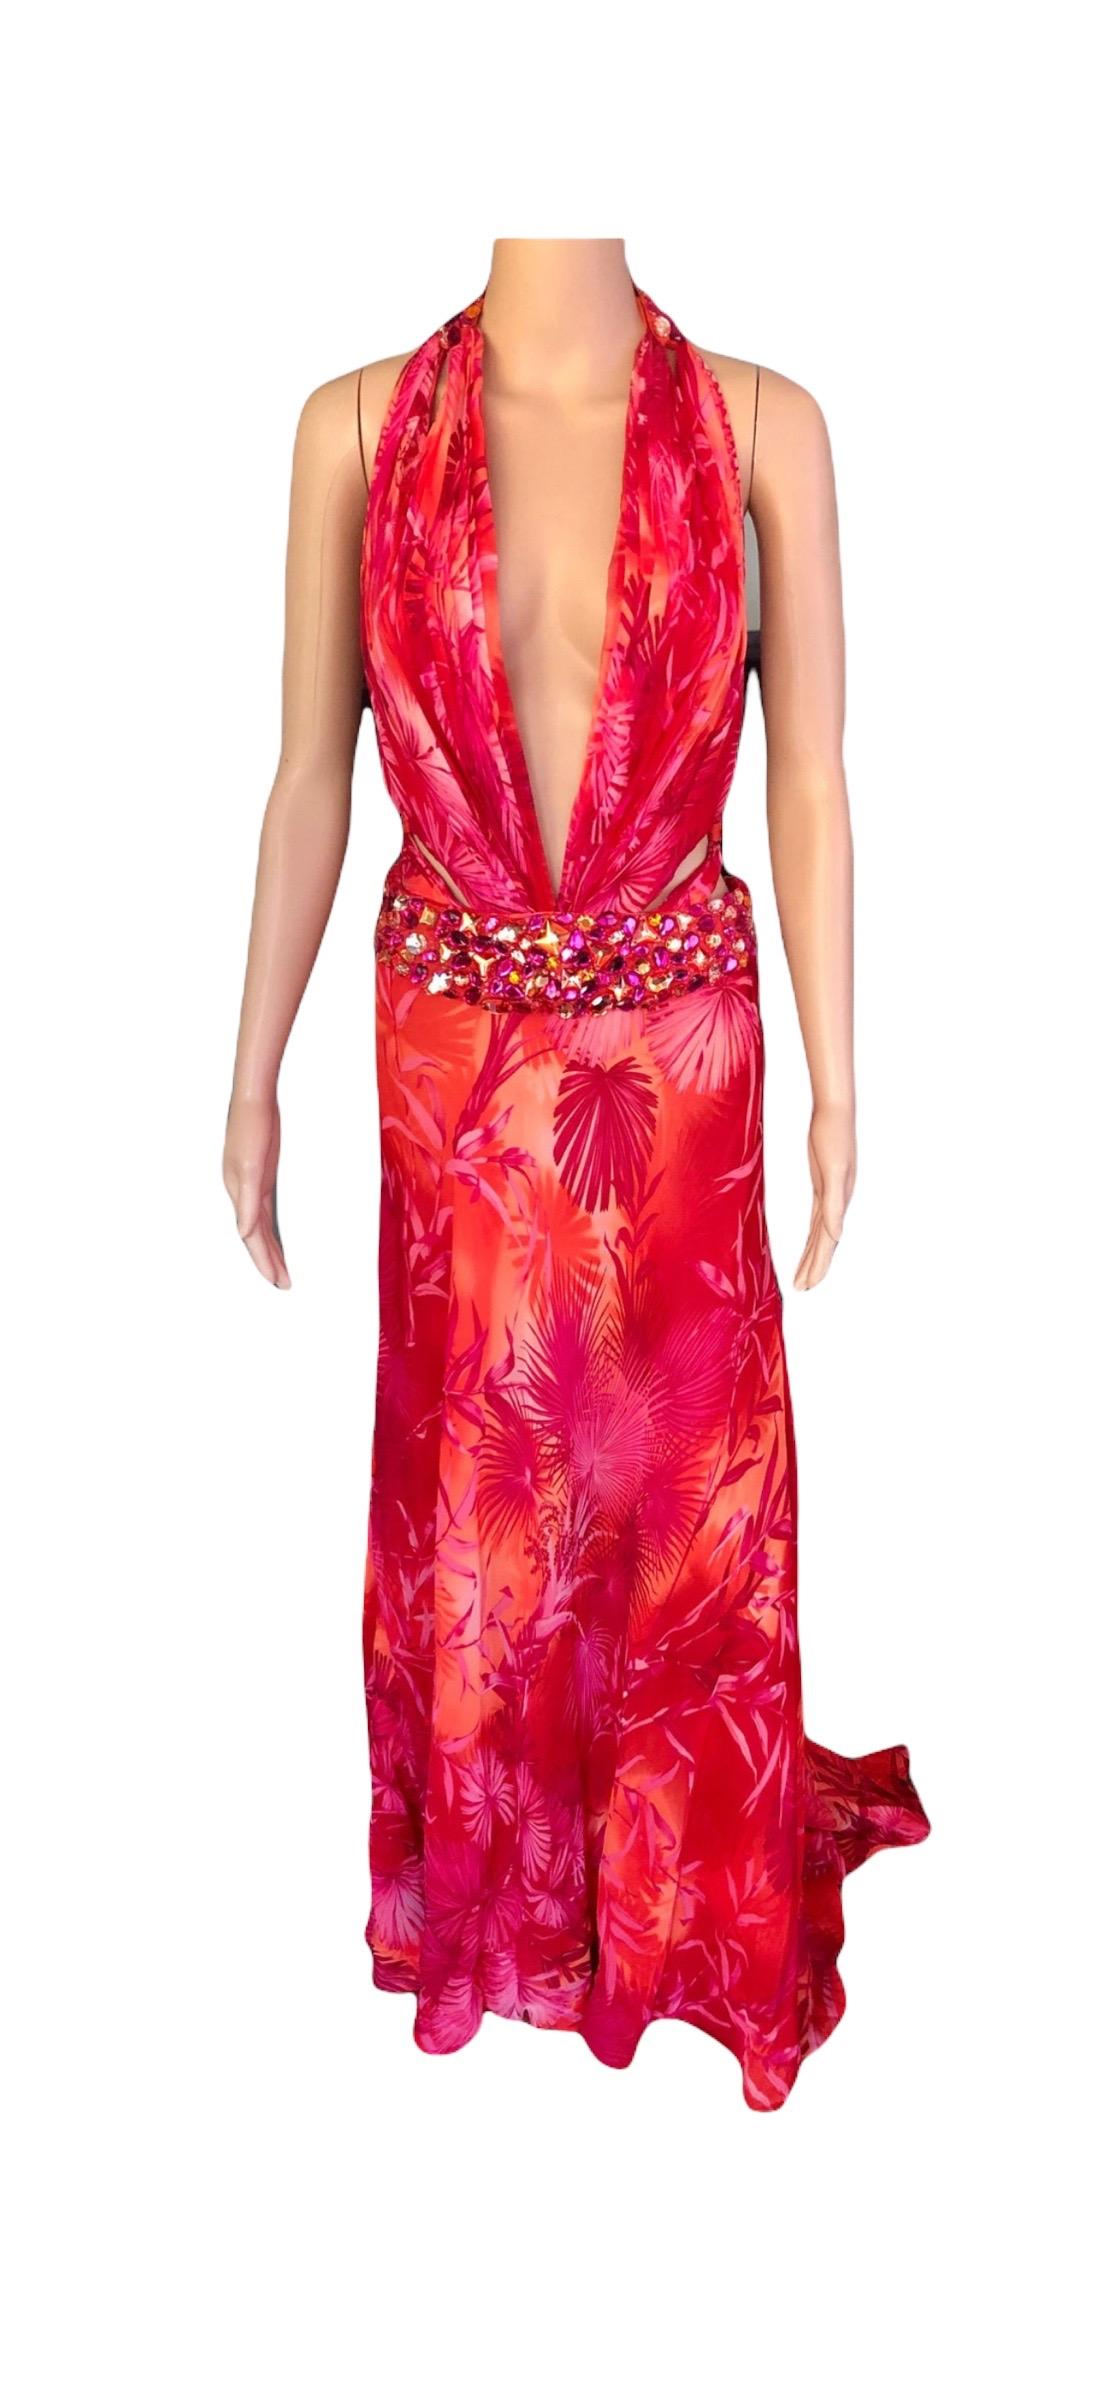 Gianni Versace S/S 2000 Runway Embellished Jungle Print Evening Dress Gown For Sale 1